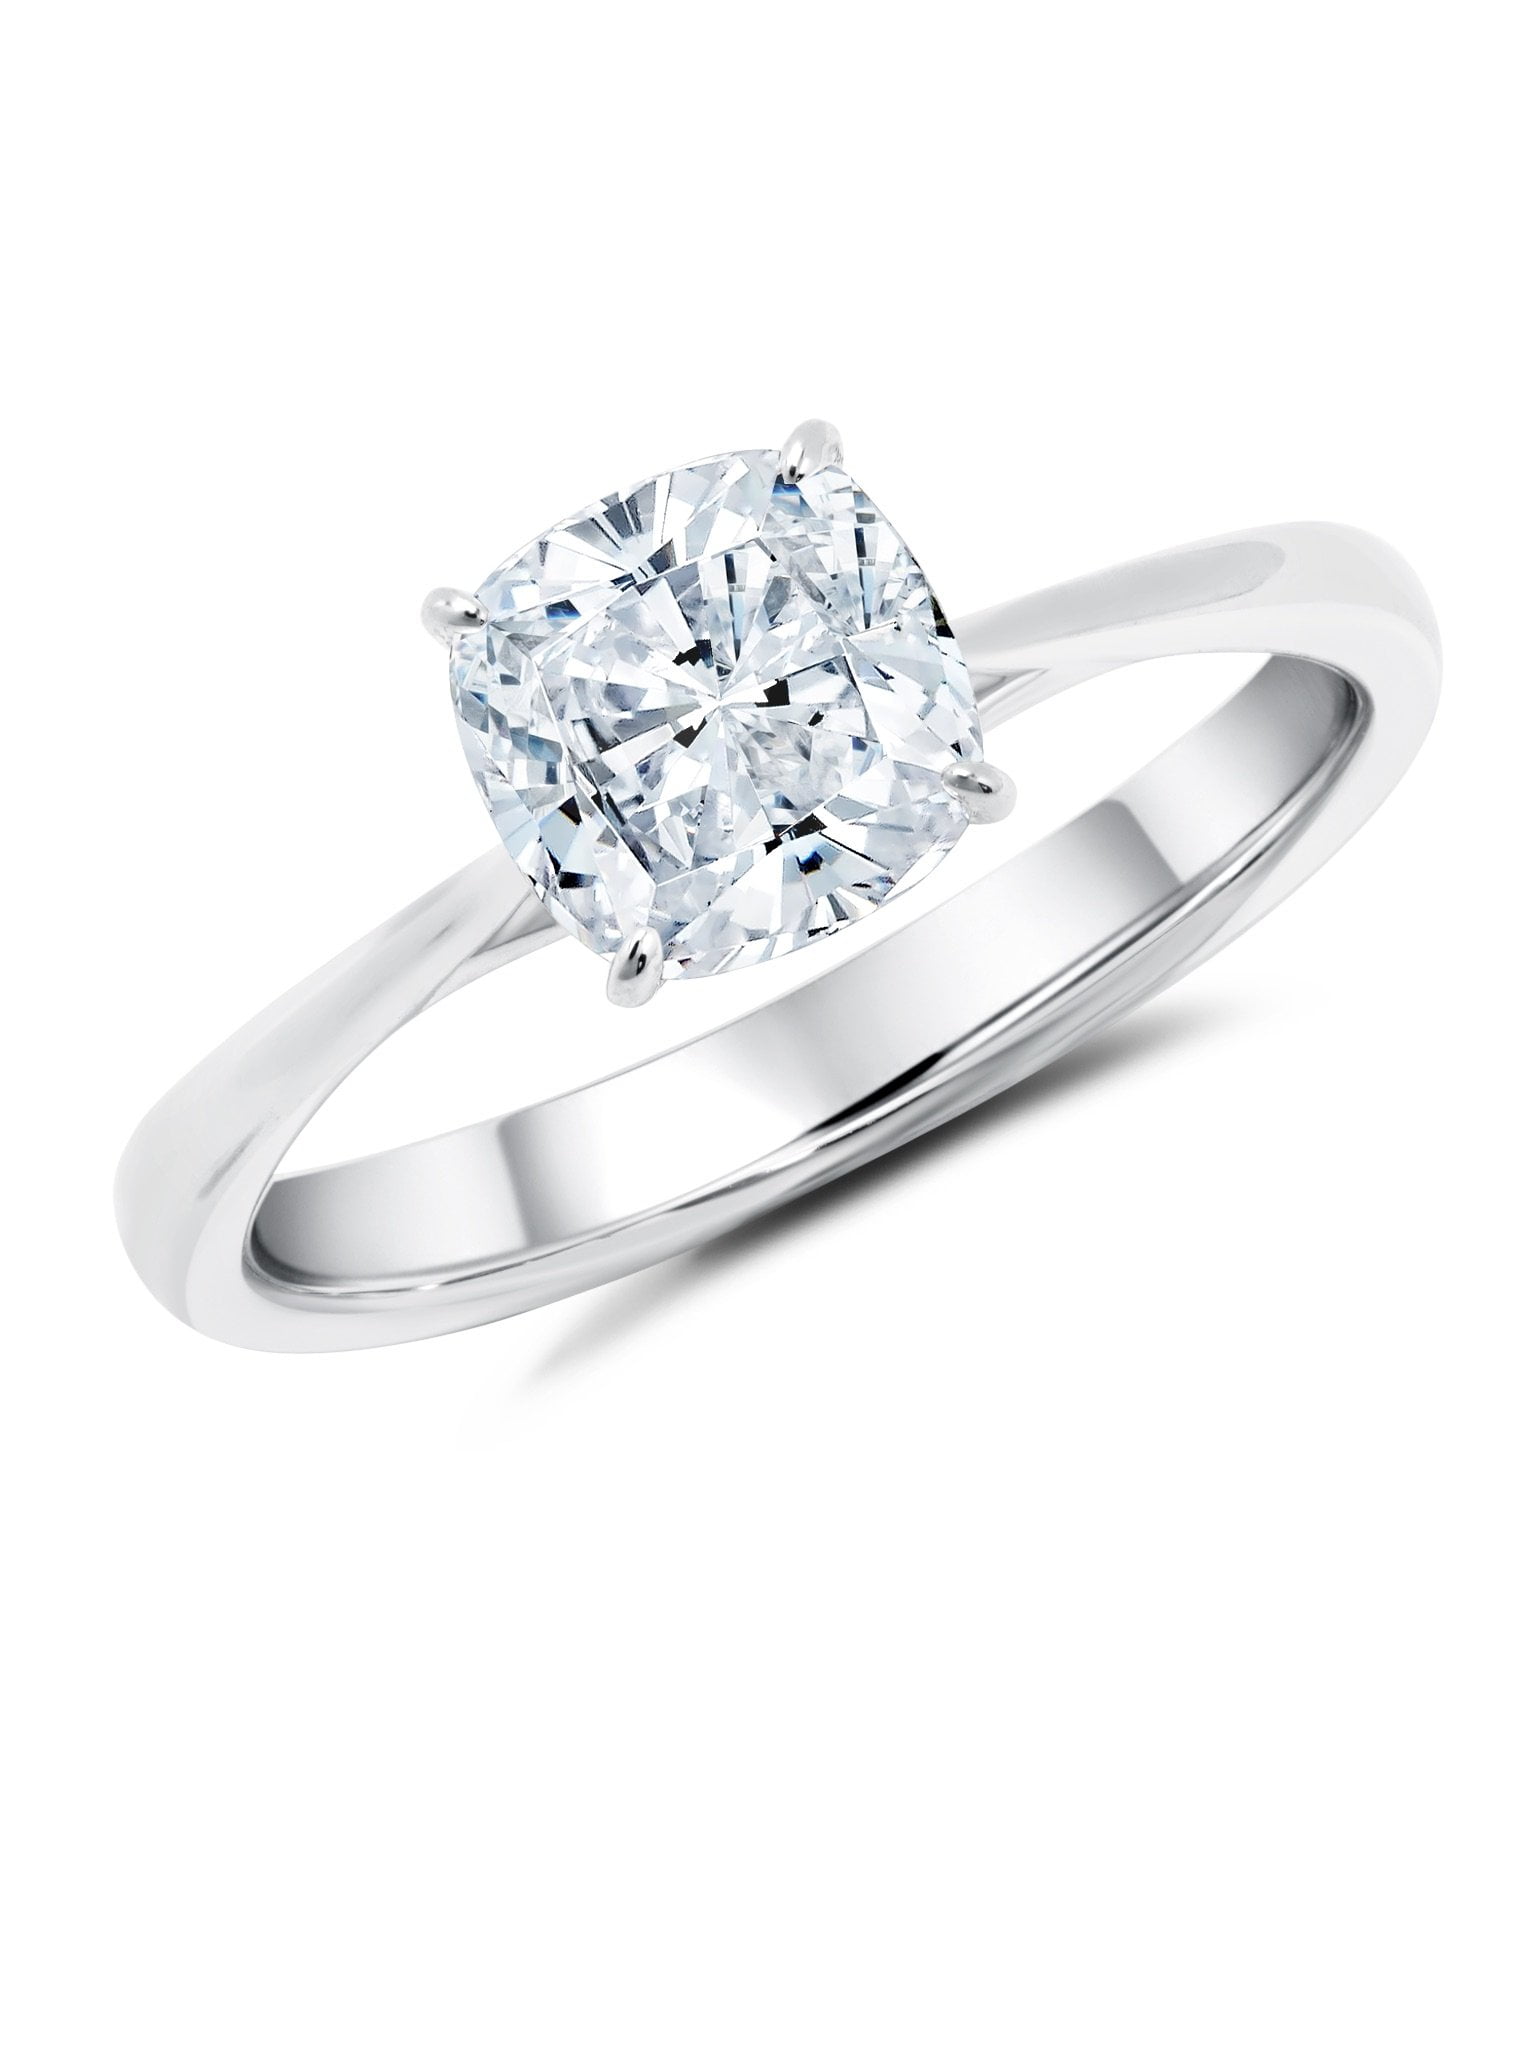 1 Ct Cushion Cut Engagement Rings on Sale, UP TO 67% OFF | www 